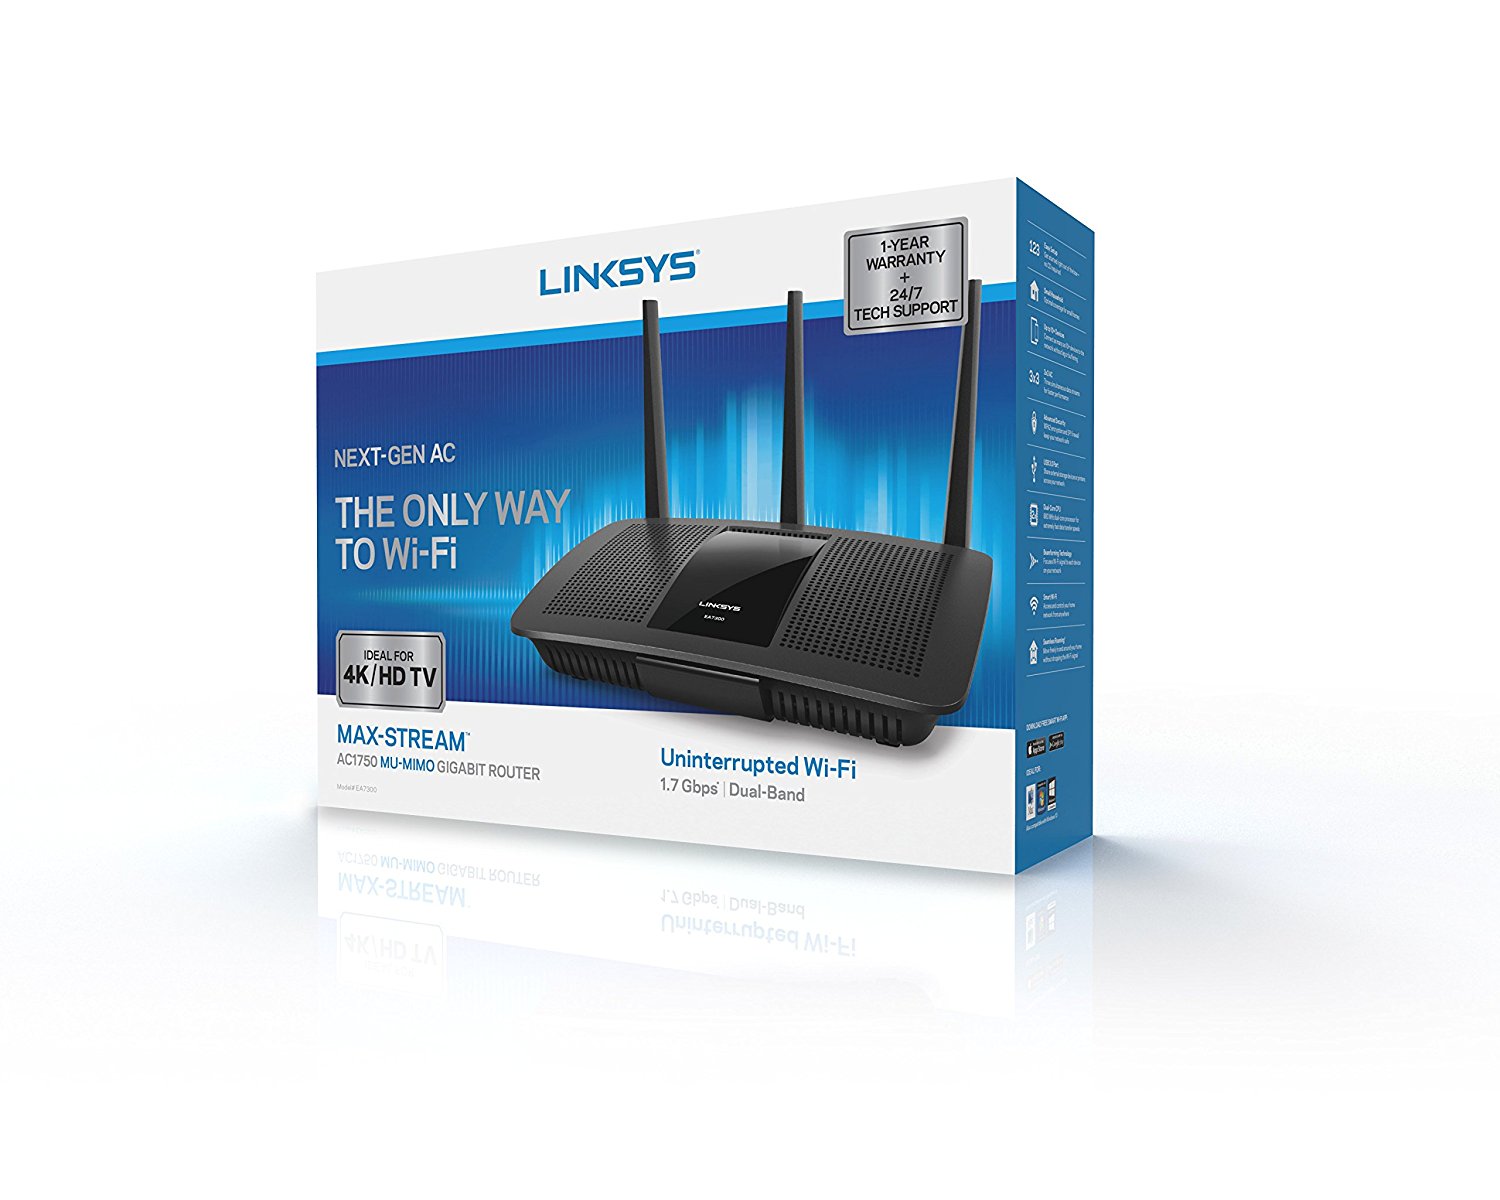 Linksys Max Stream Dual Band AC1750 Wi-Fi 5 Router, Black (EA7300) - image 5 of 8